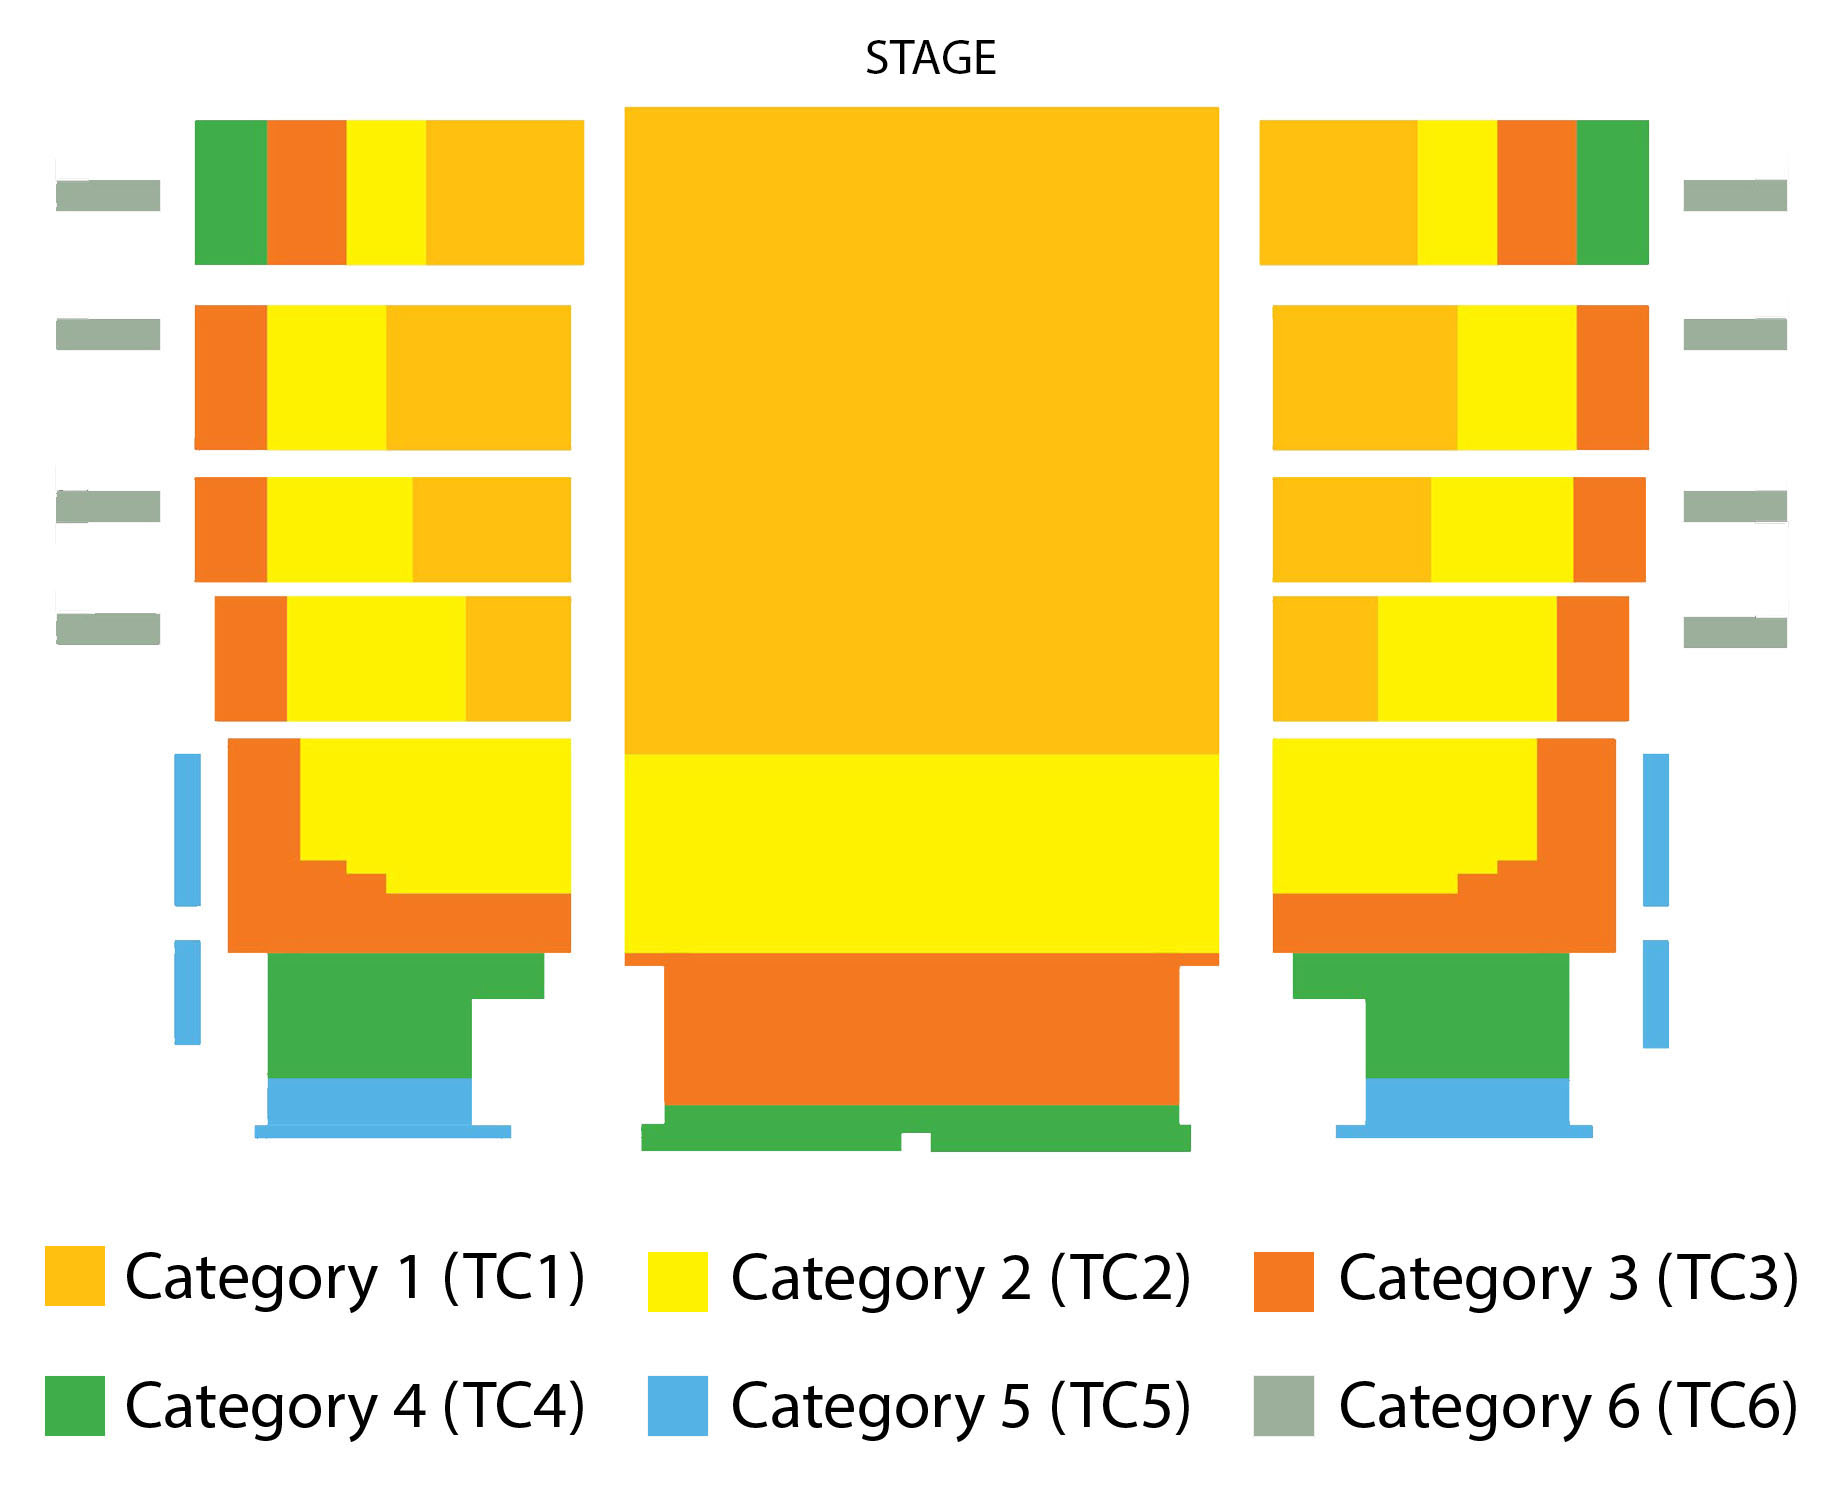 Oberammergau Play Theater Seating Chart